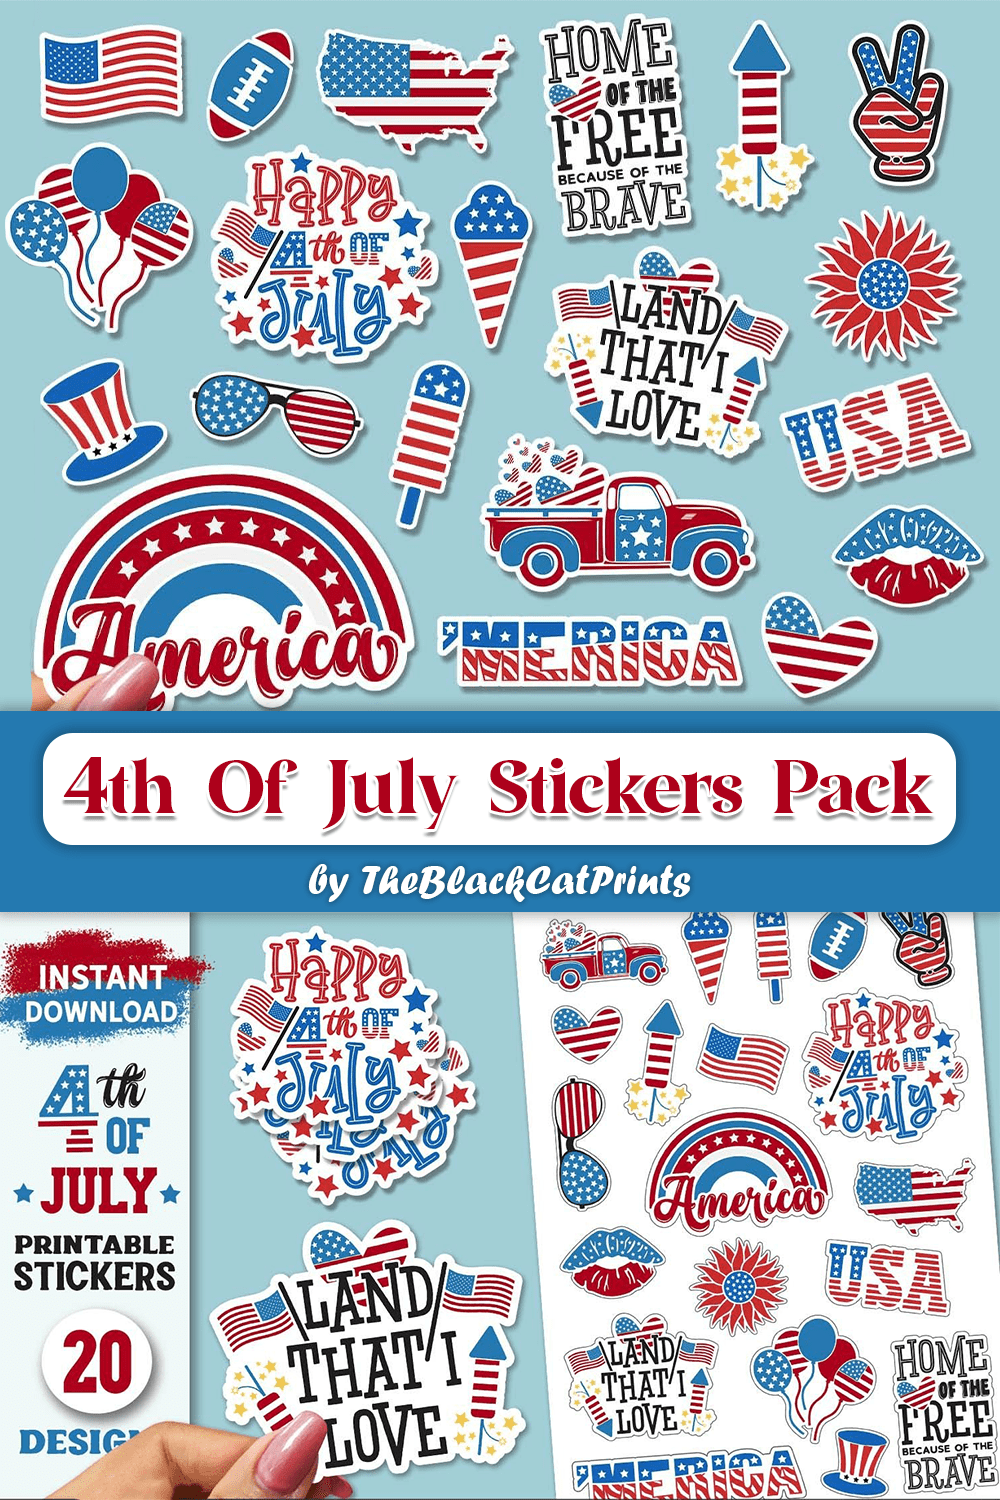 4th Of July Stickers Pack - Pinterest image preview.